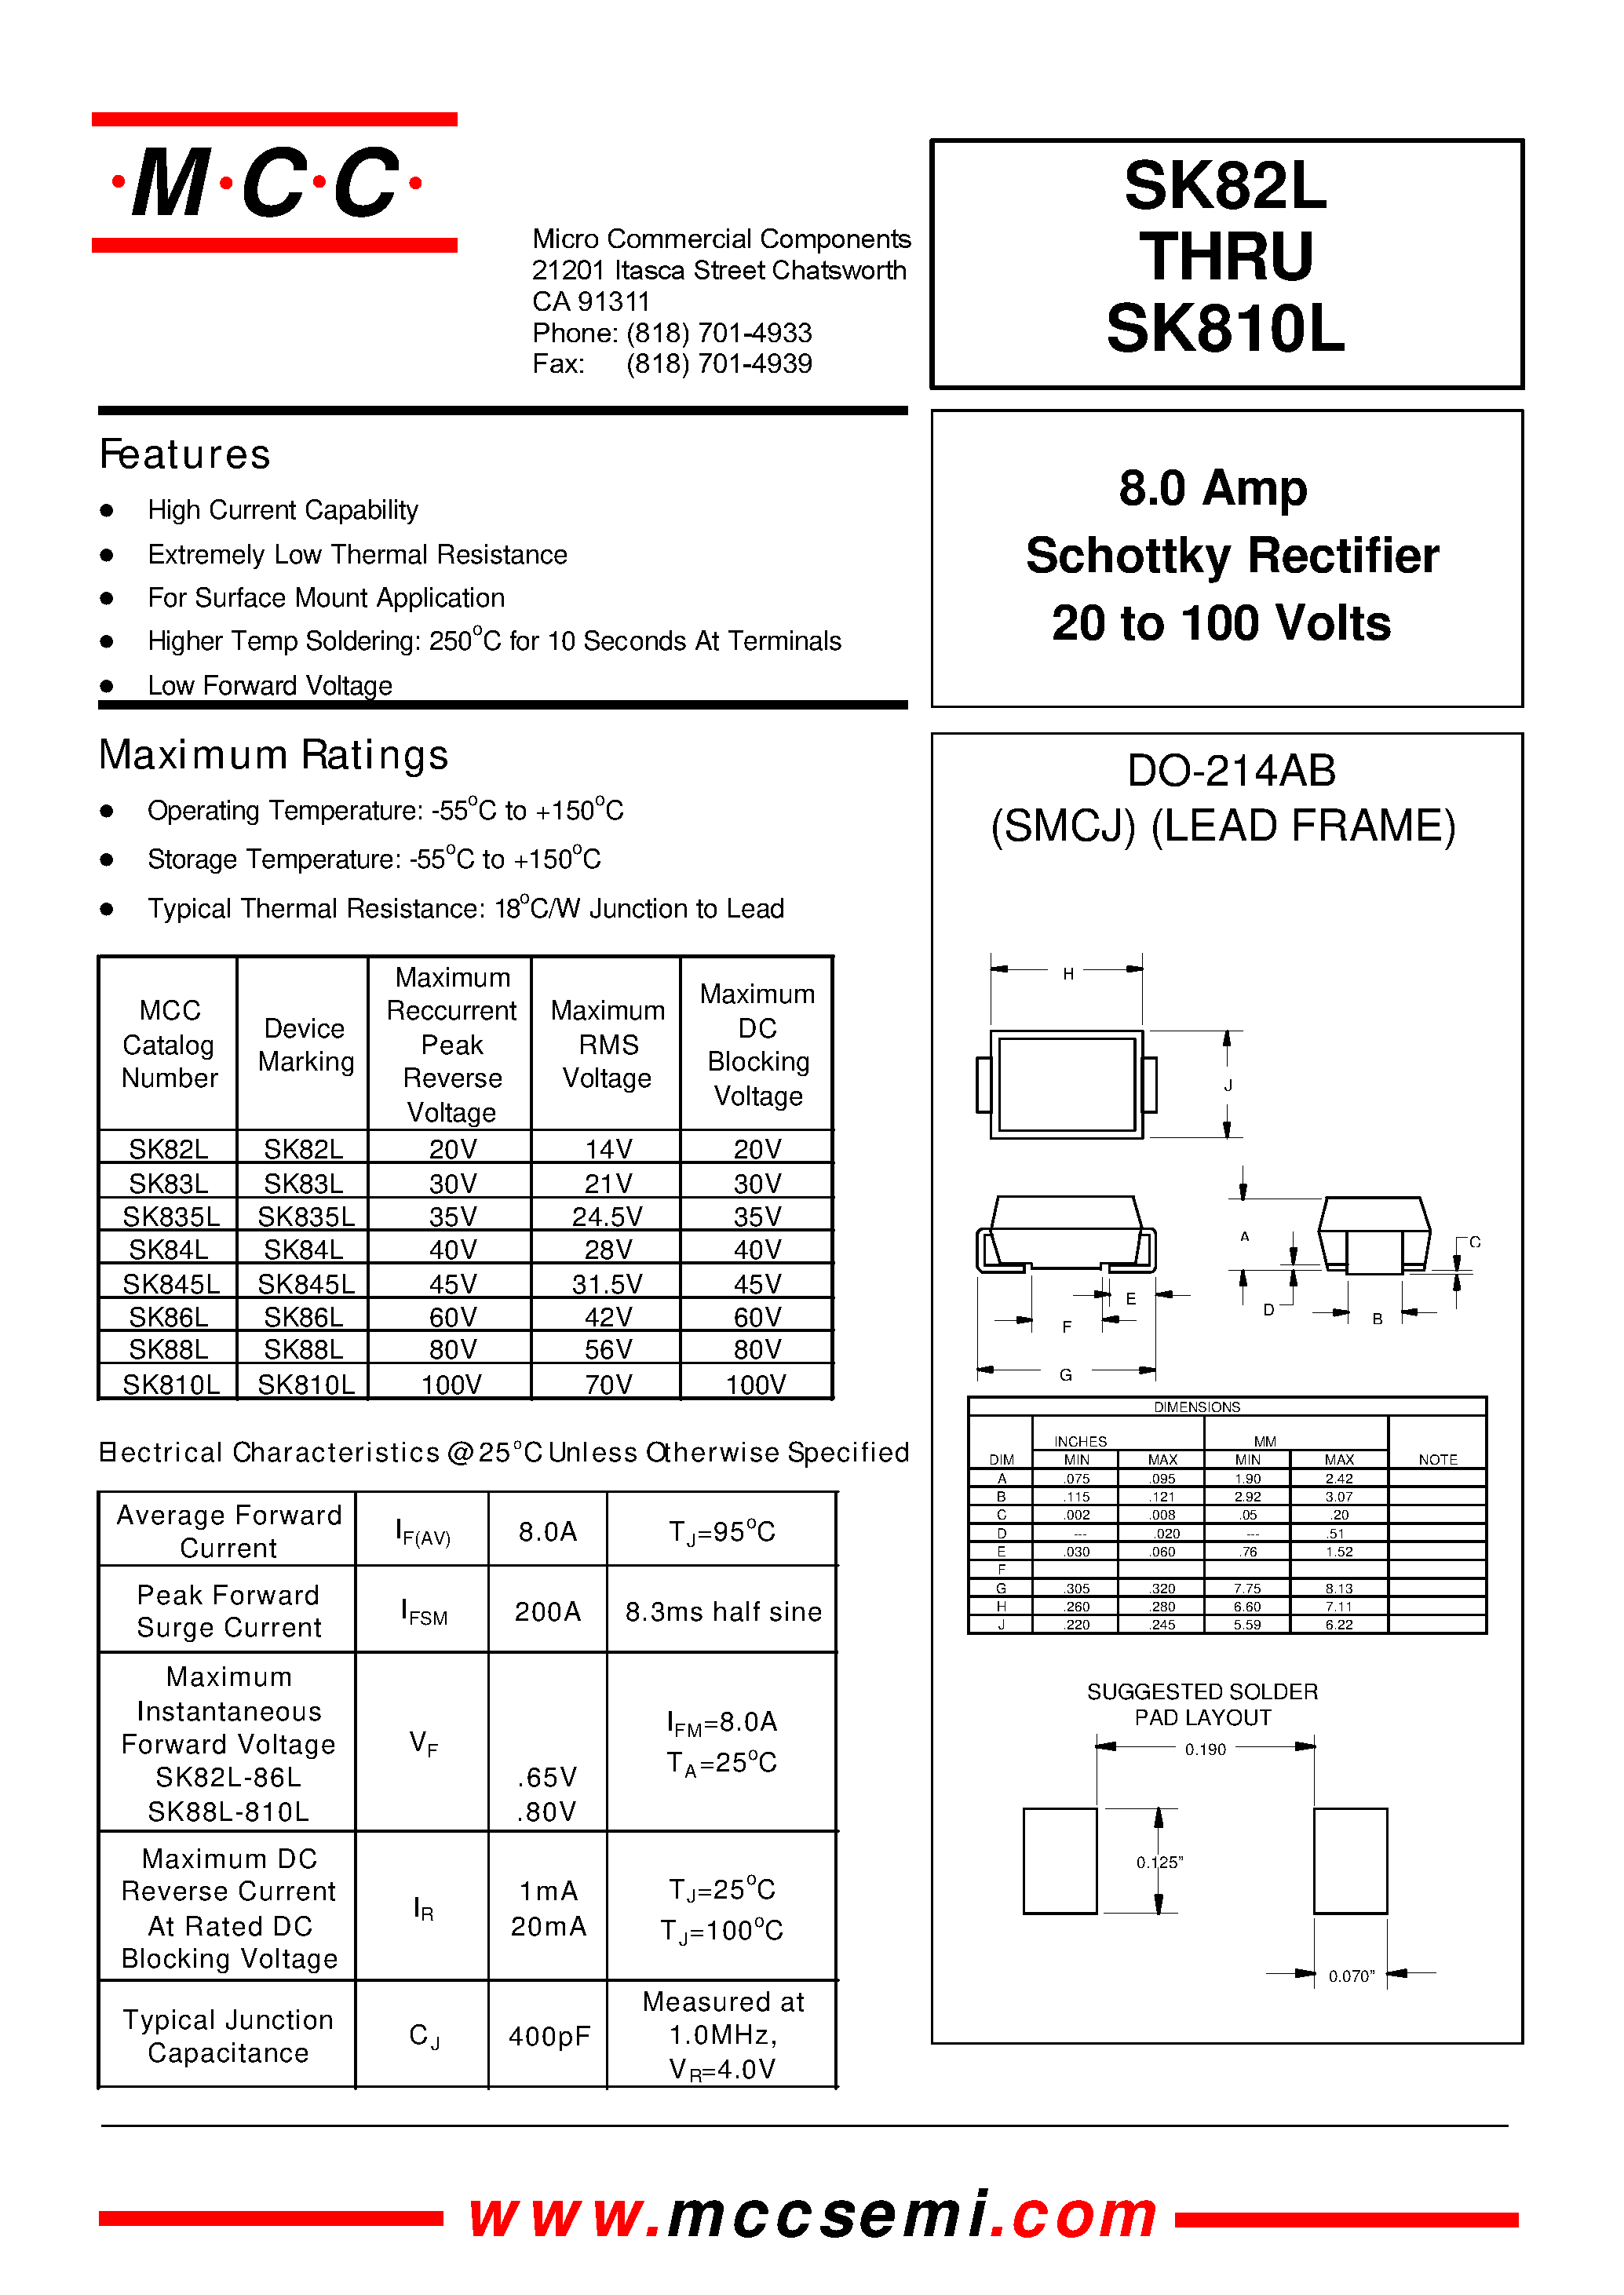 Datasheet SK835L - 8.0 Amp Schottky Rectifier 20 to 100 Volts page 1